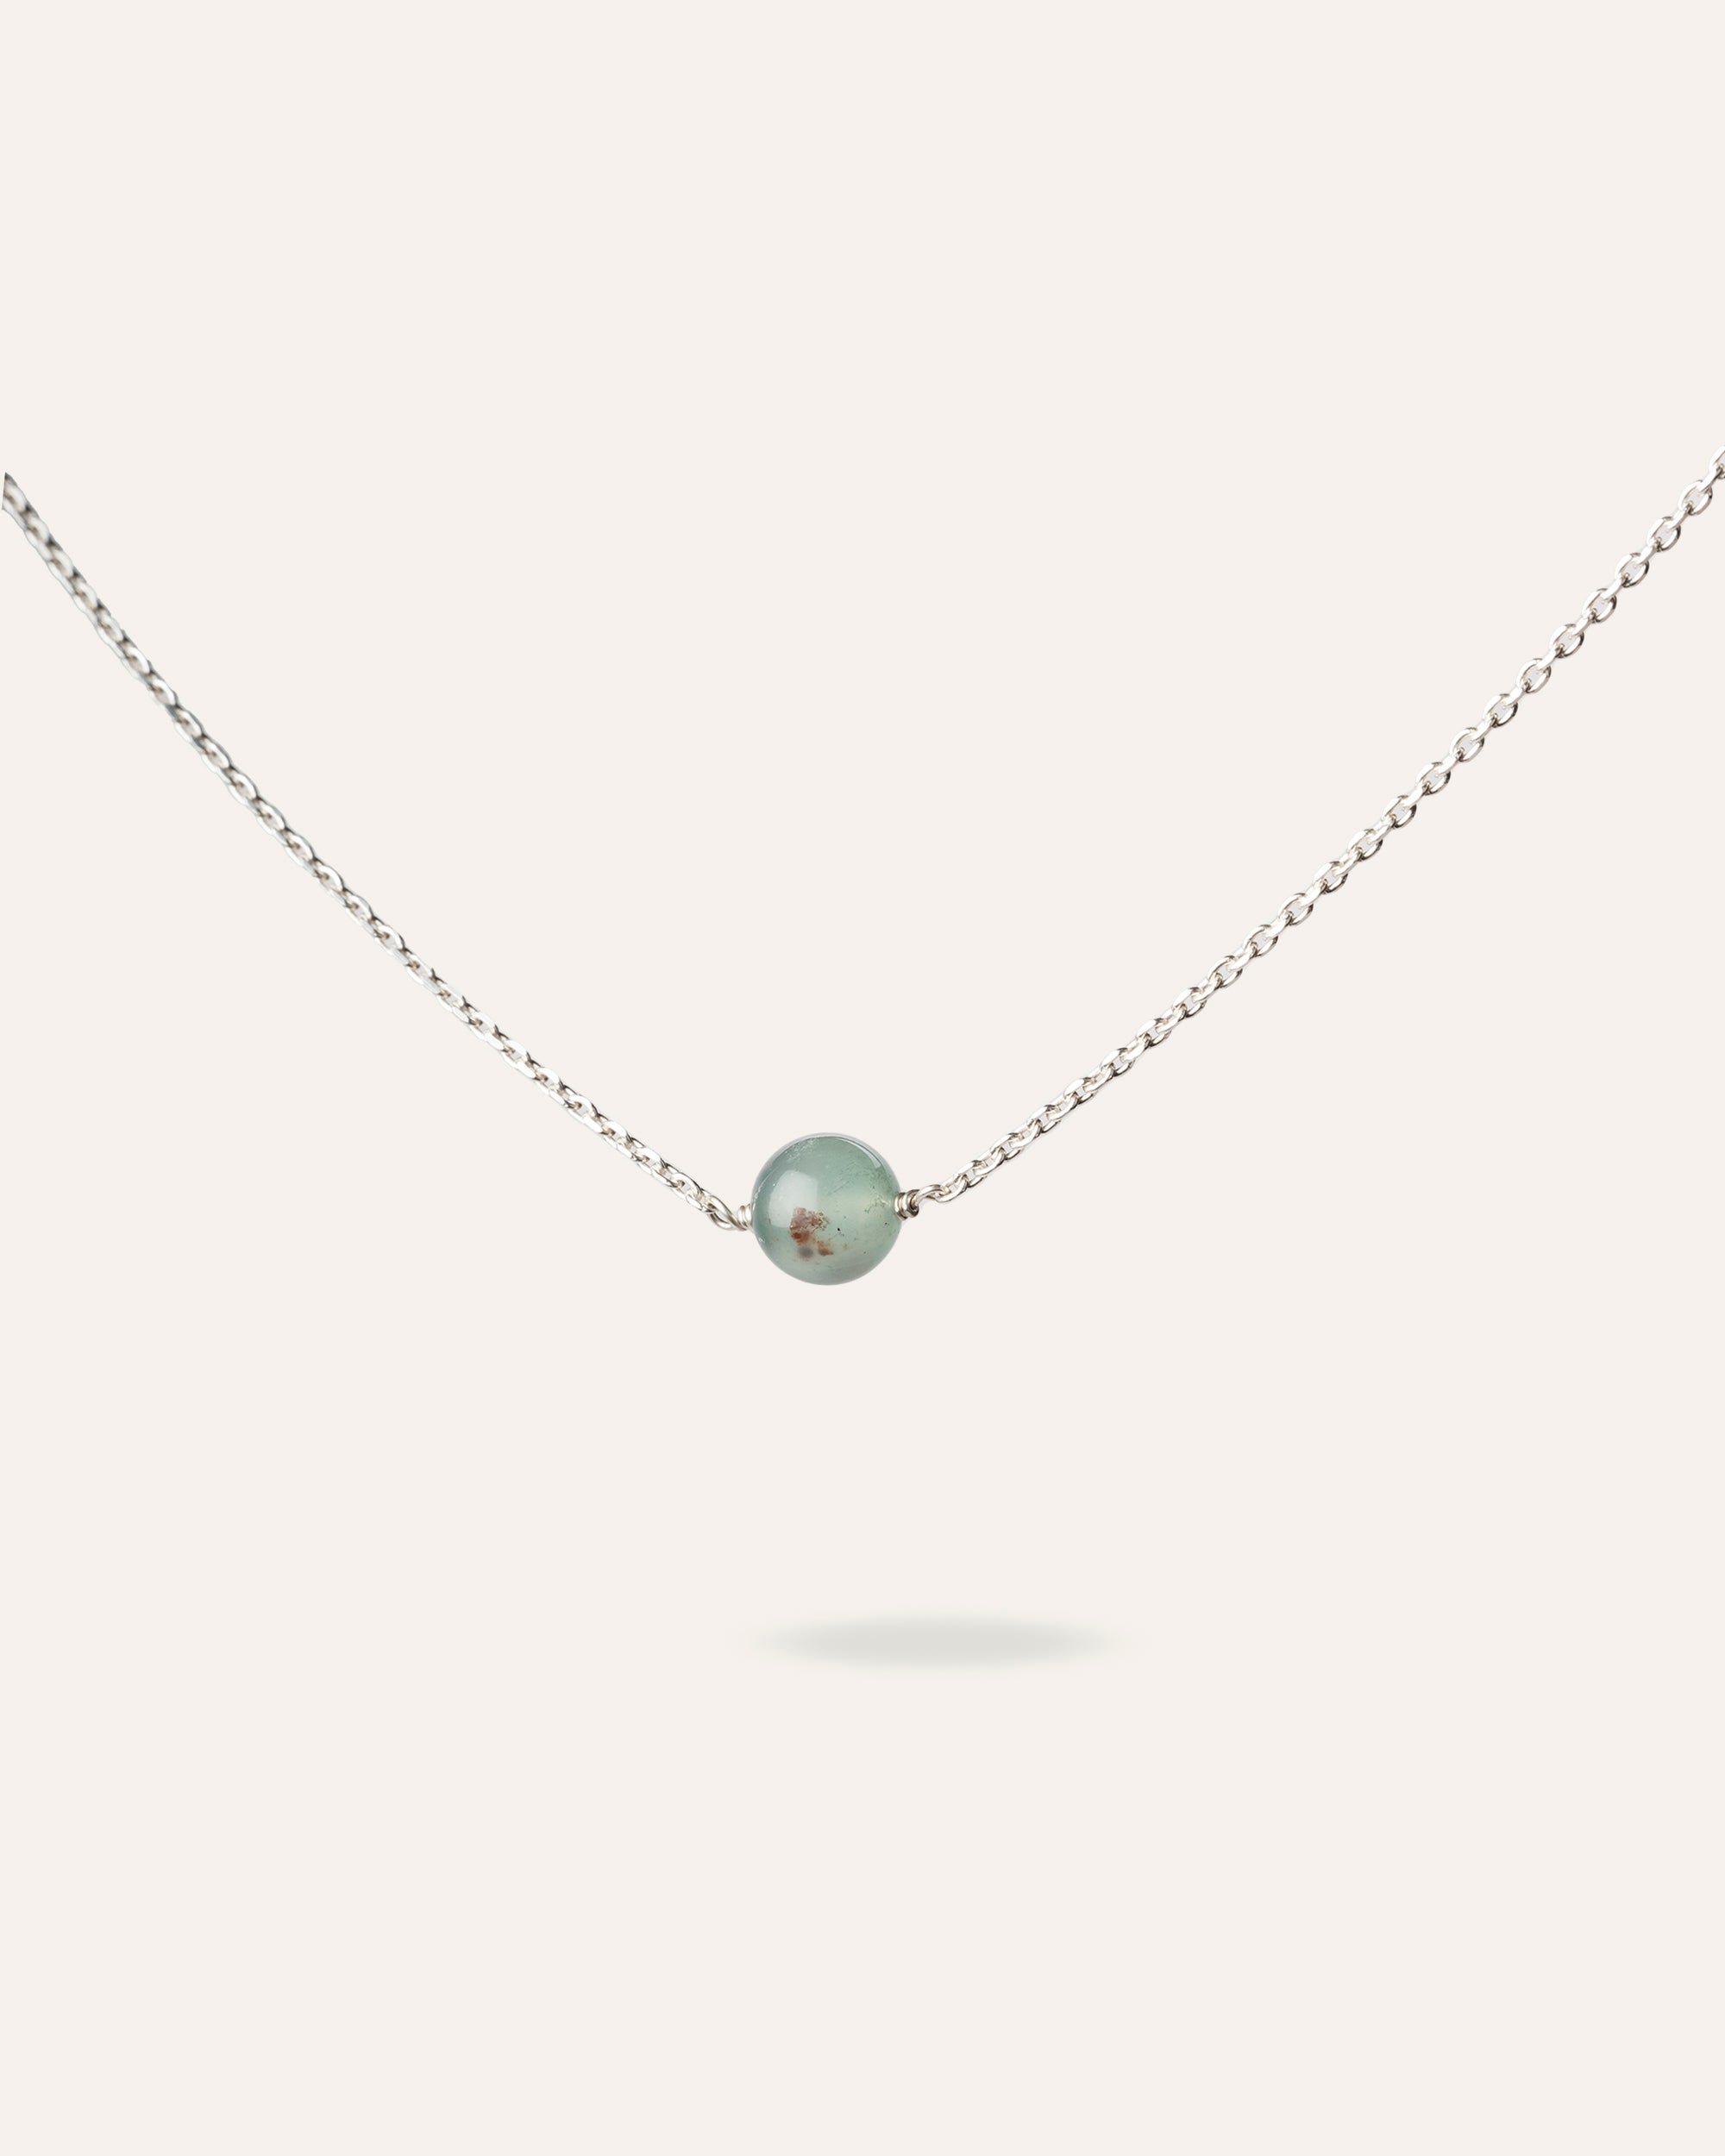 Themis silver and aquaprase necklace